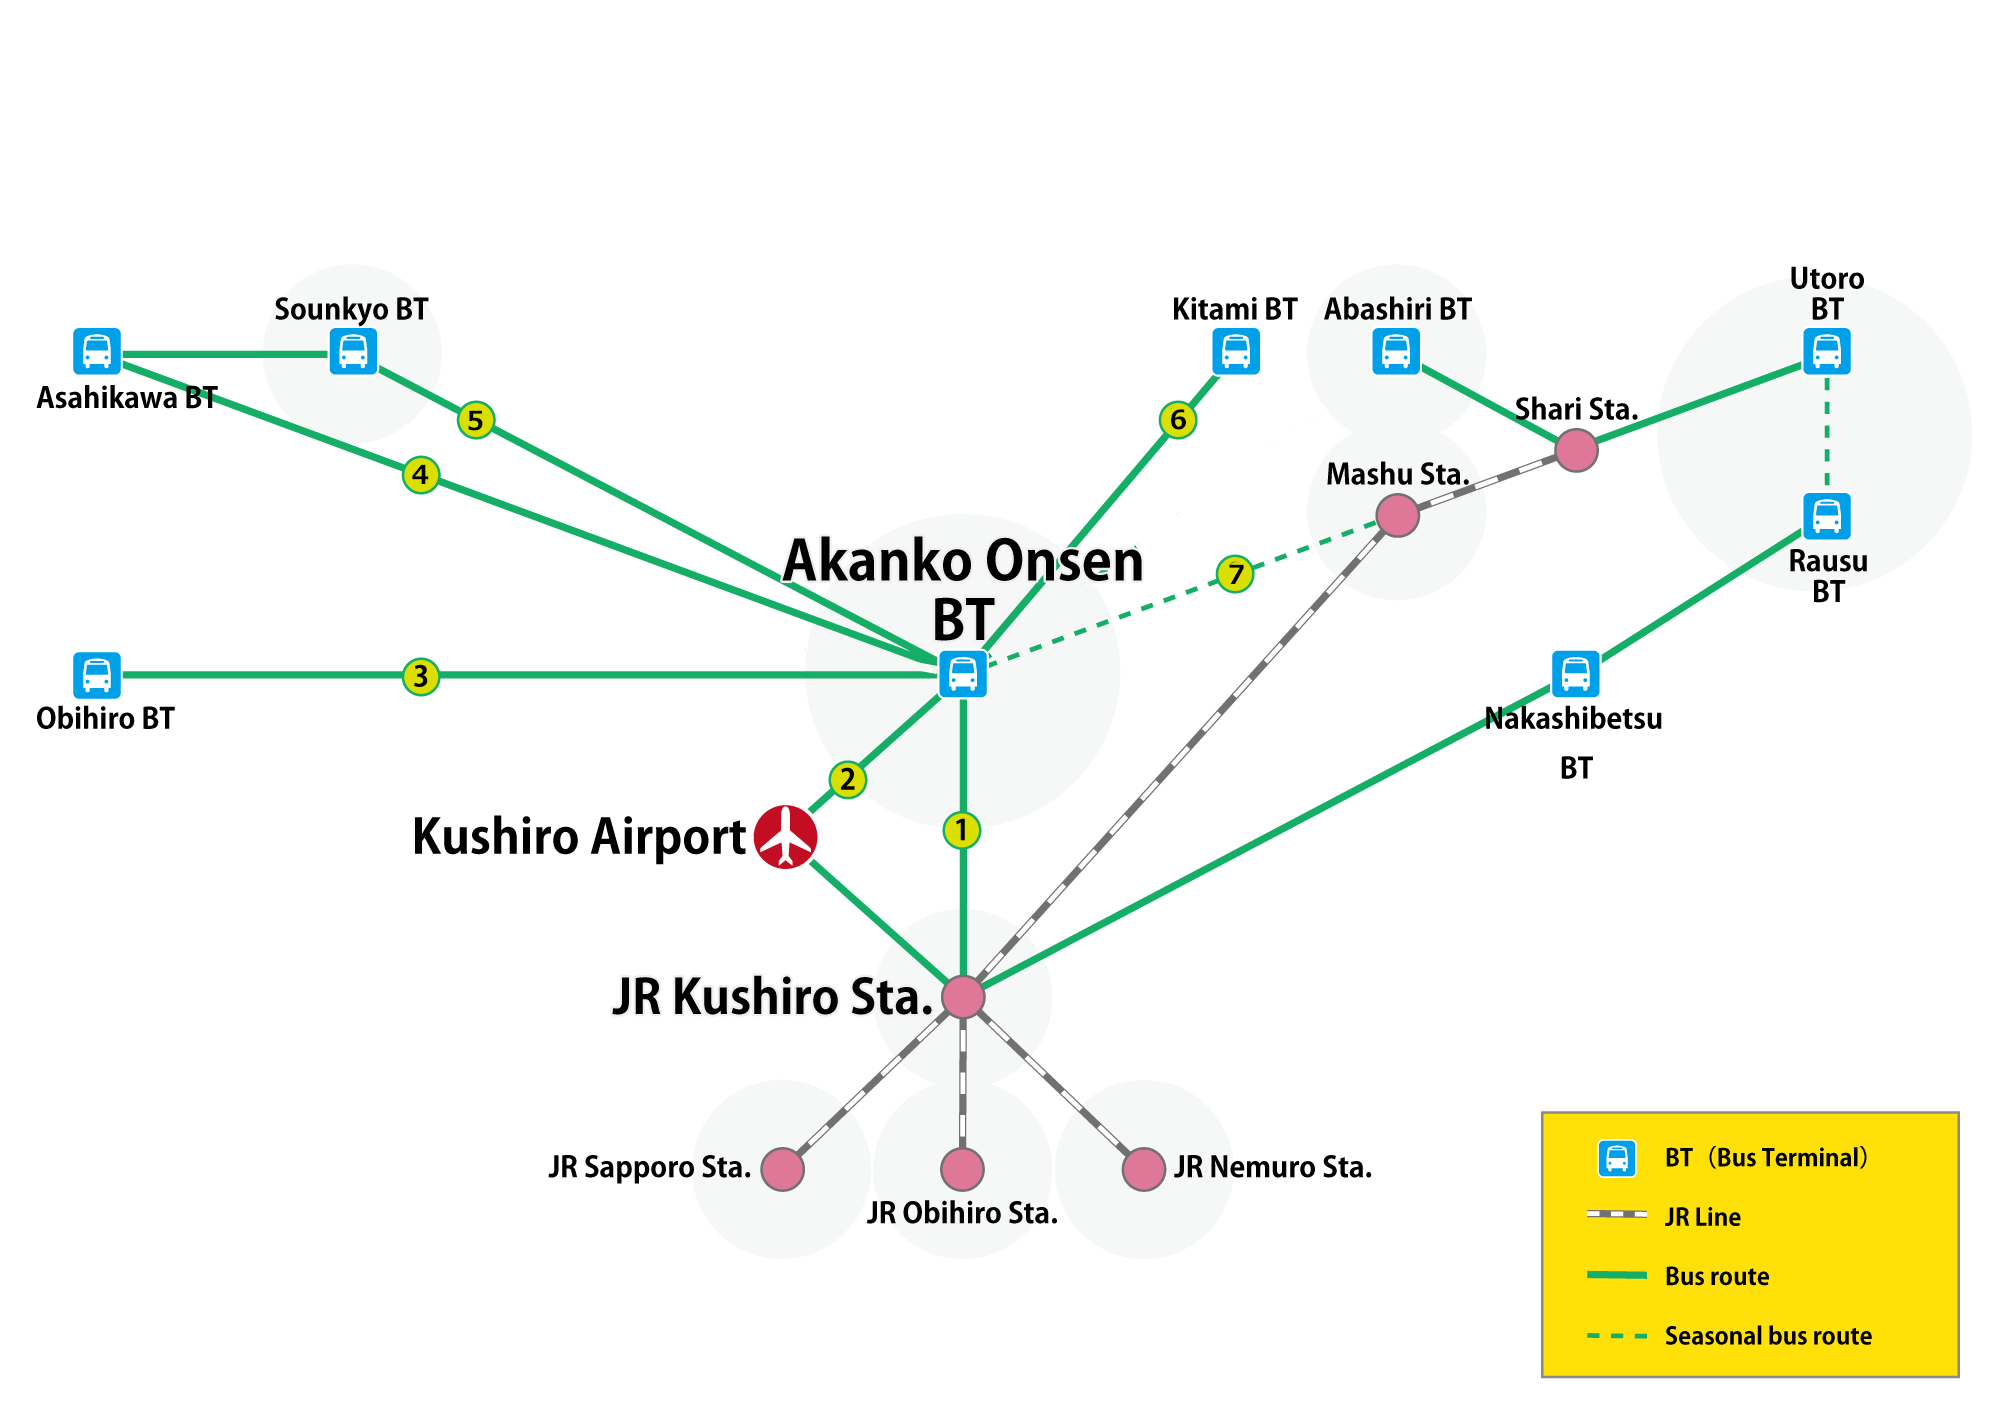 Akankoonsen BT (bus terminal) departure and arrival line